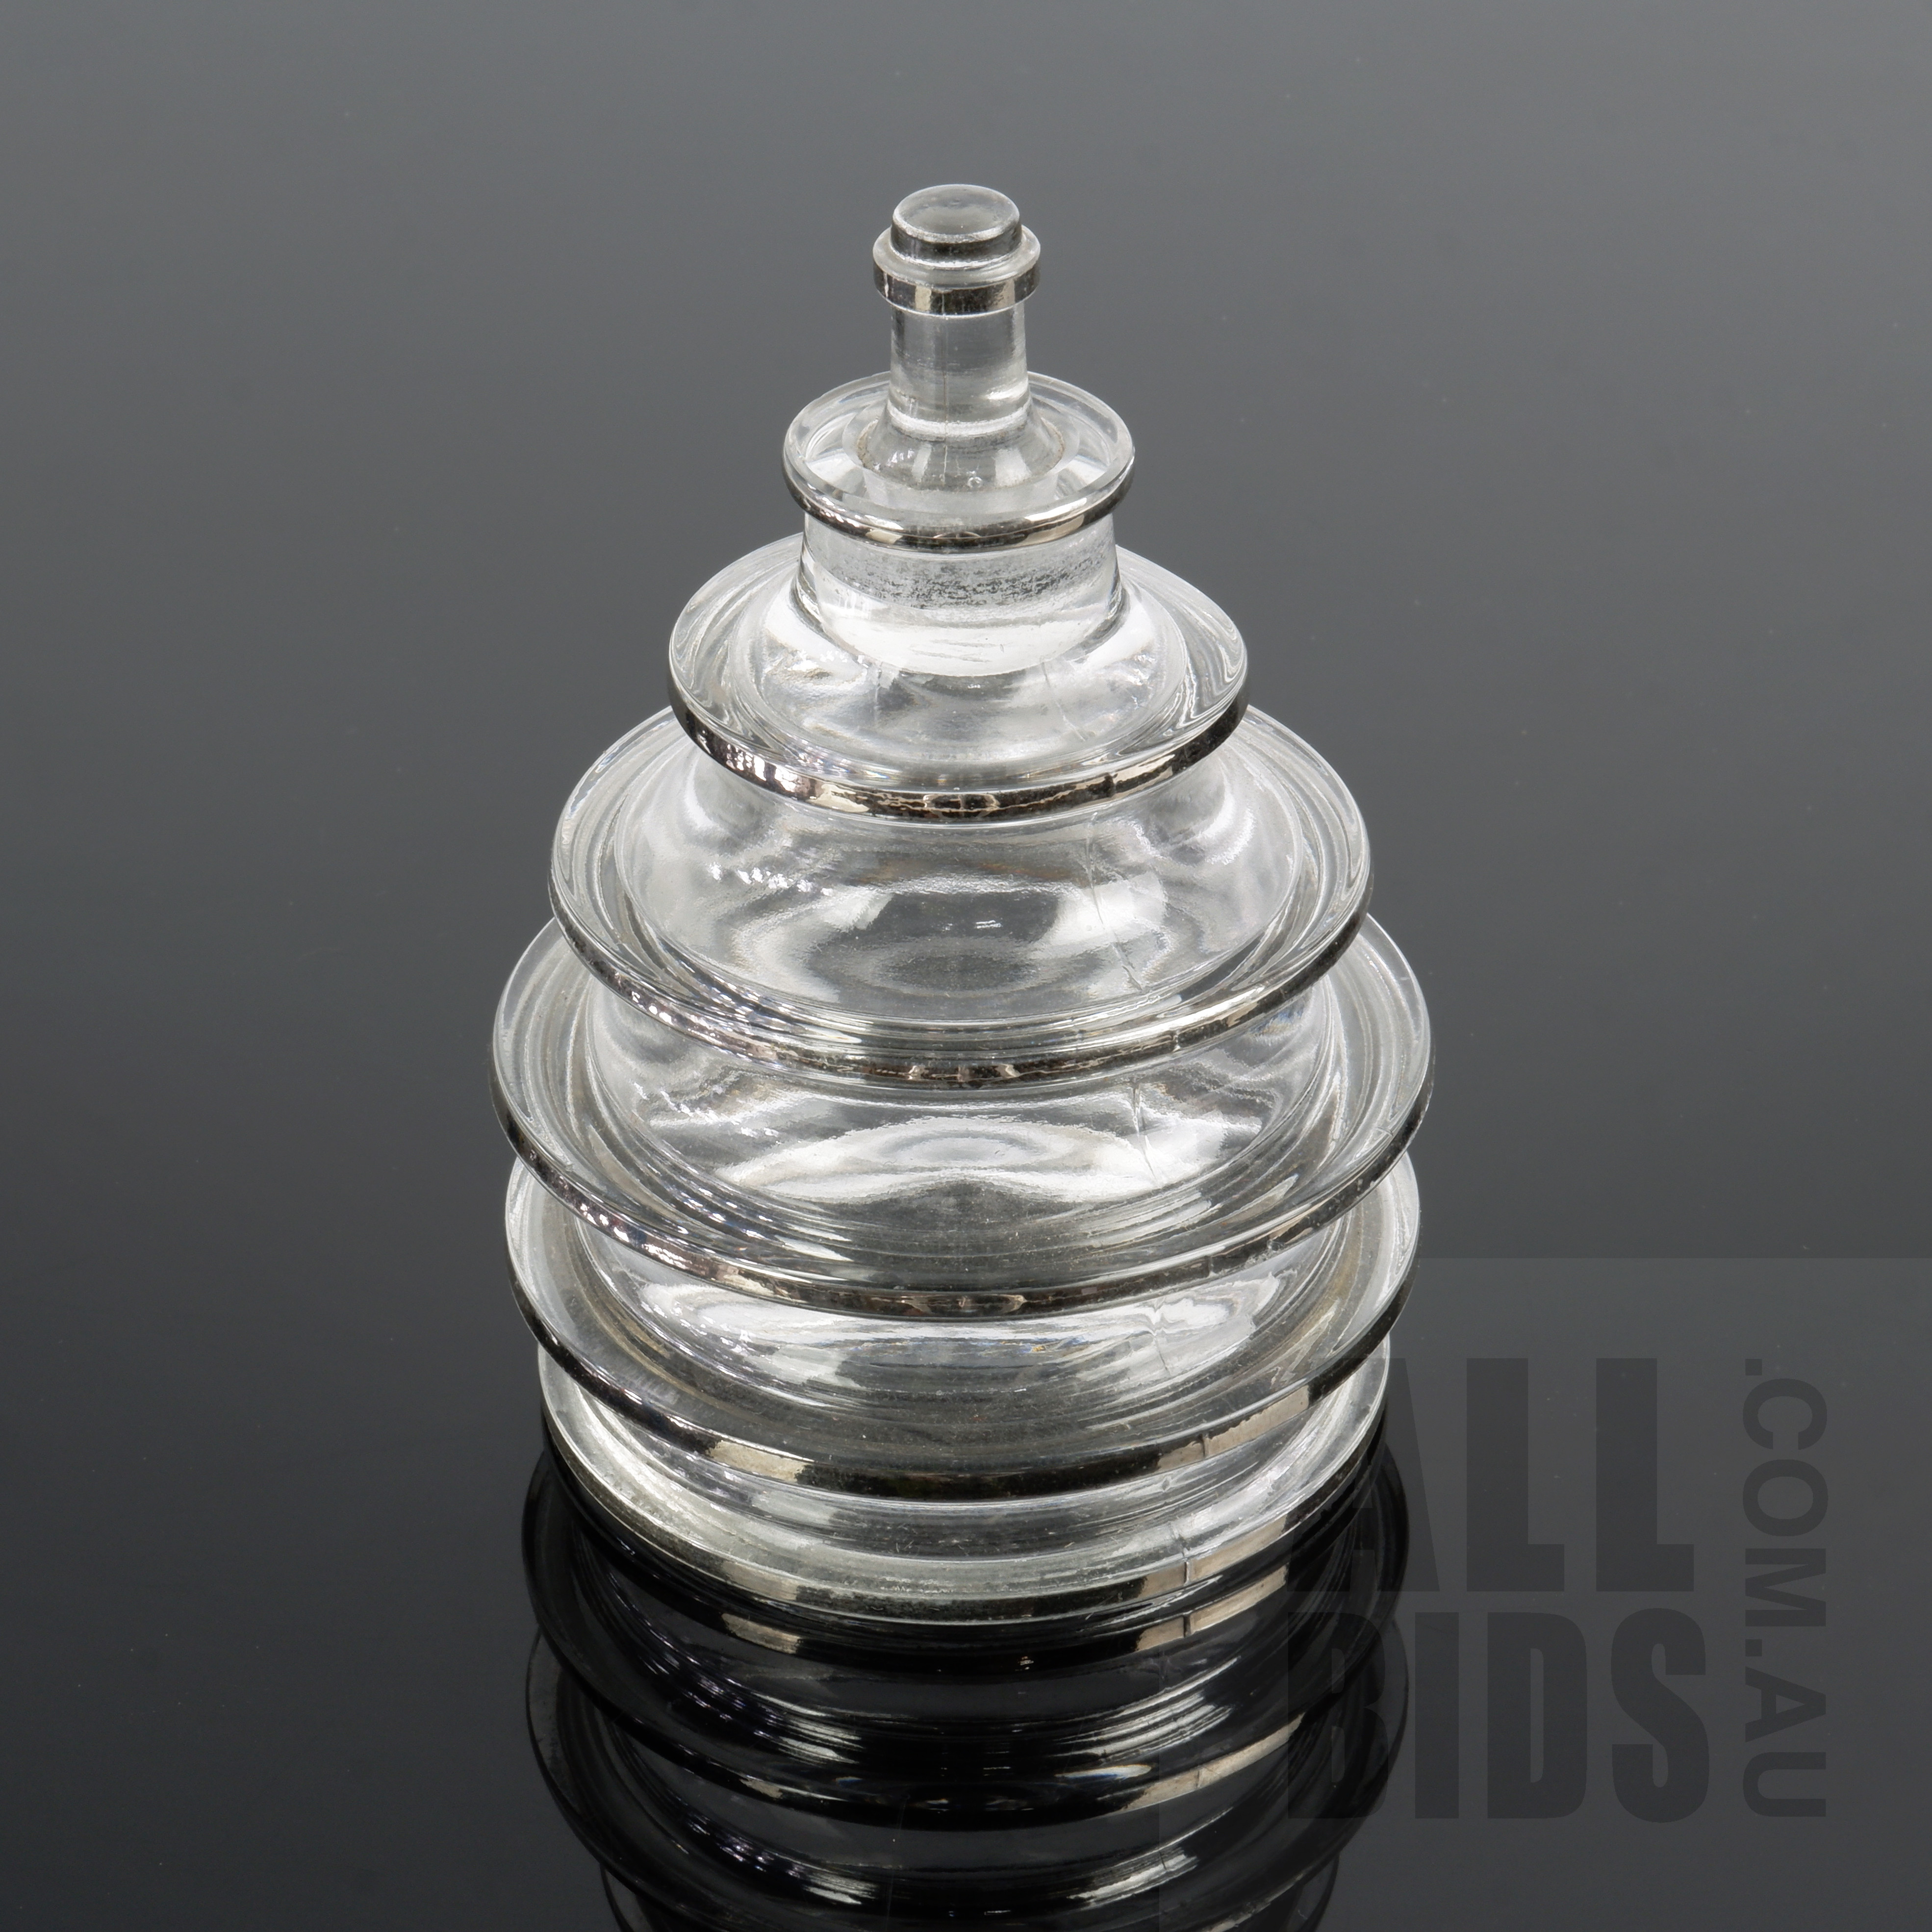 'Rene Lalique Imprudence Perfume Bottle for Worth Circa 1938'